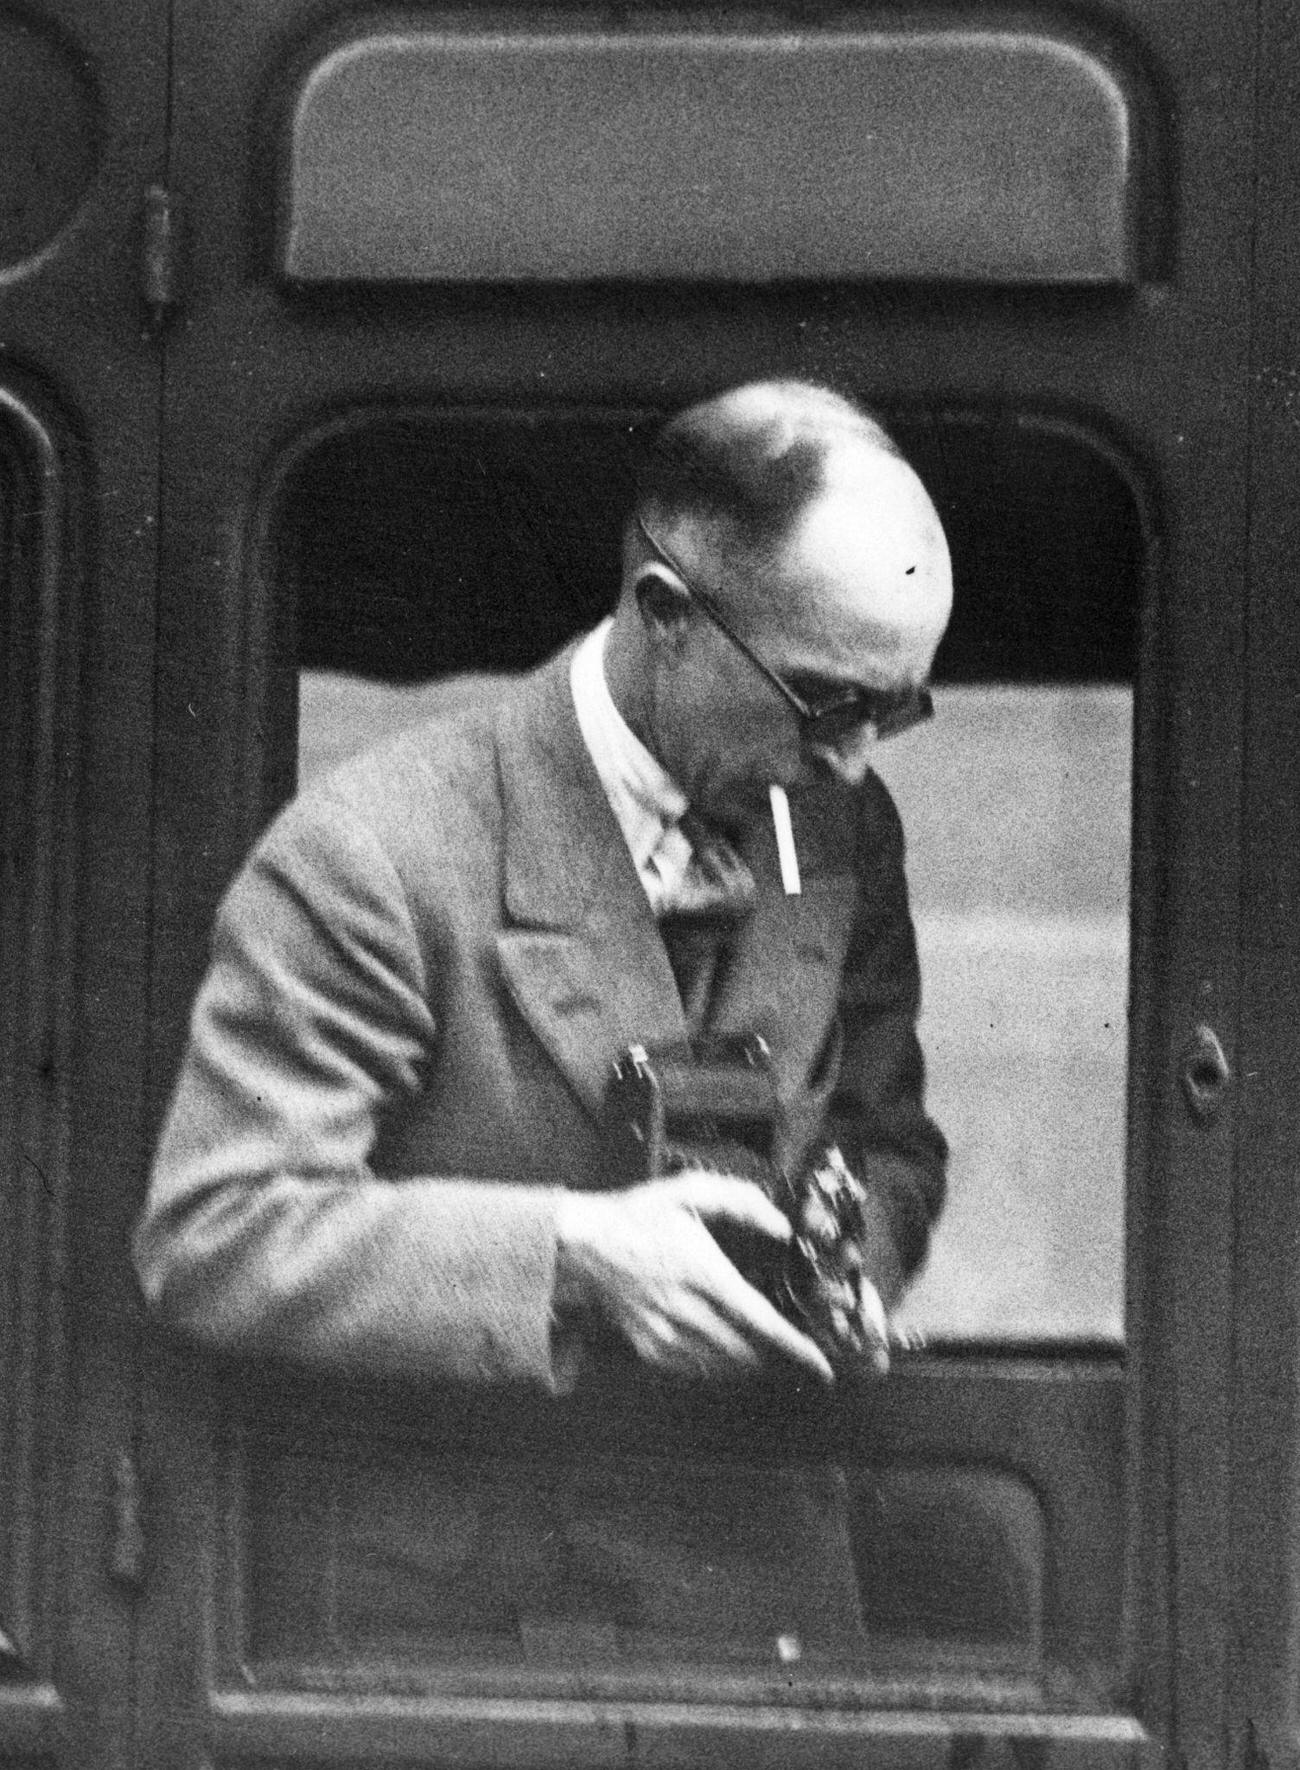 bAmerican photographer James Abbe traveling in the train, 1930s